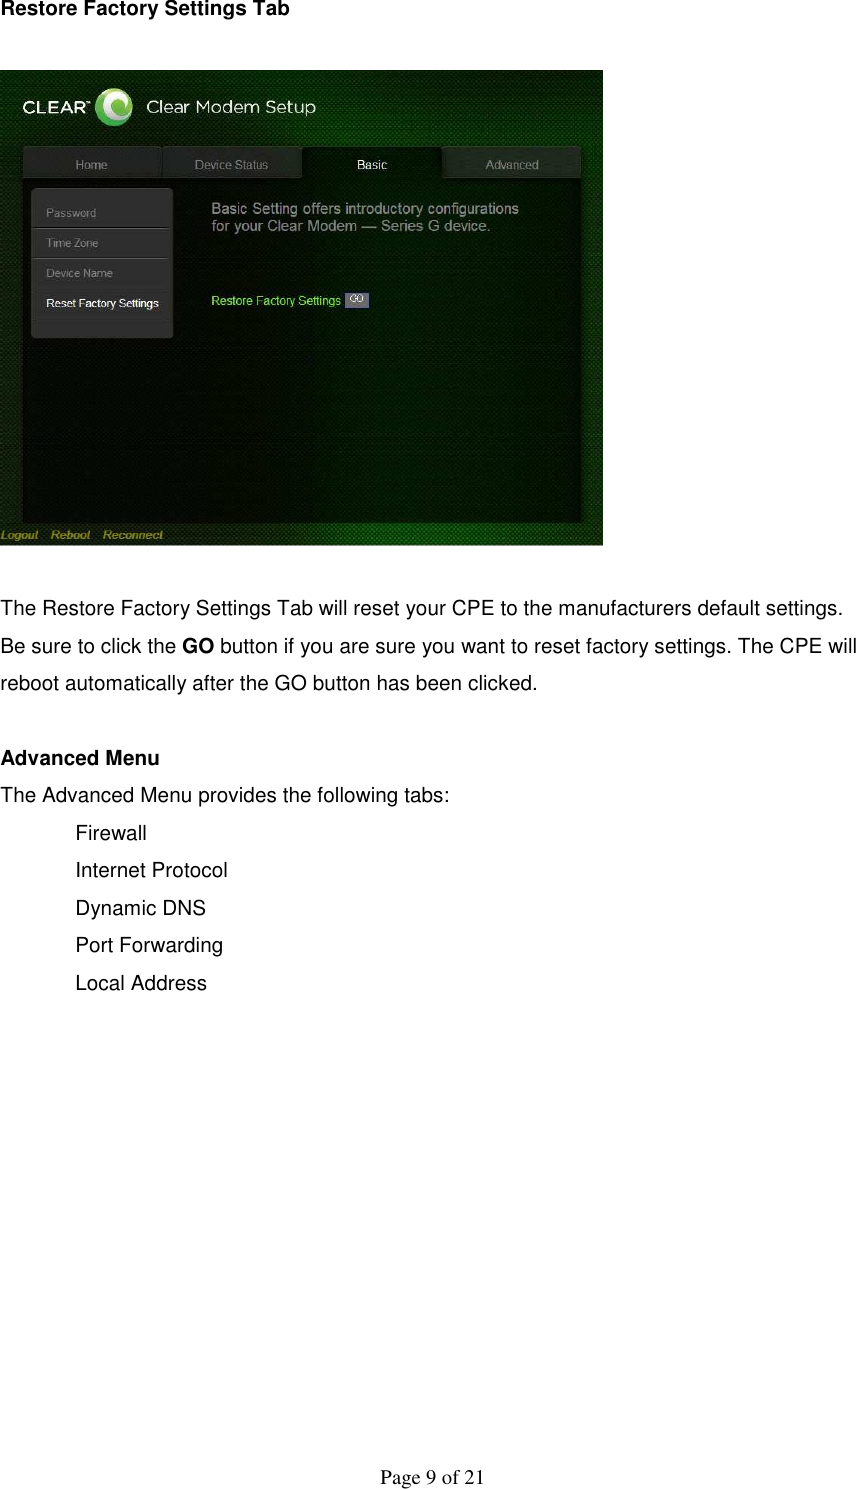  Page 9 of 21 Restore Factory Settings Tab    The Restore Factory Settings Tab will reset your CPE to the manufacturers default settings. Be sure to click the GO button if you are sure you want to reset factory settings. The CPE will reboot automatically after the GO button has been clicked.  Advanced Menu The Advanced Menu provides the following tabs: Firewall   Internet Protocol Dynamic DNS Port Forwarding Local Address            